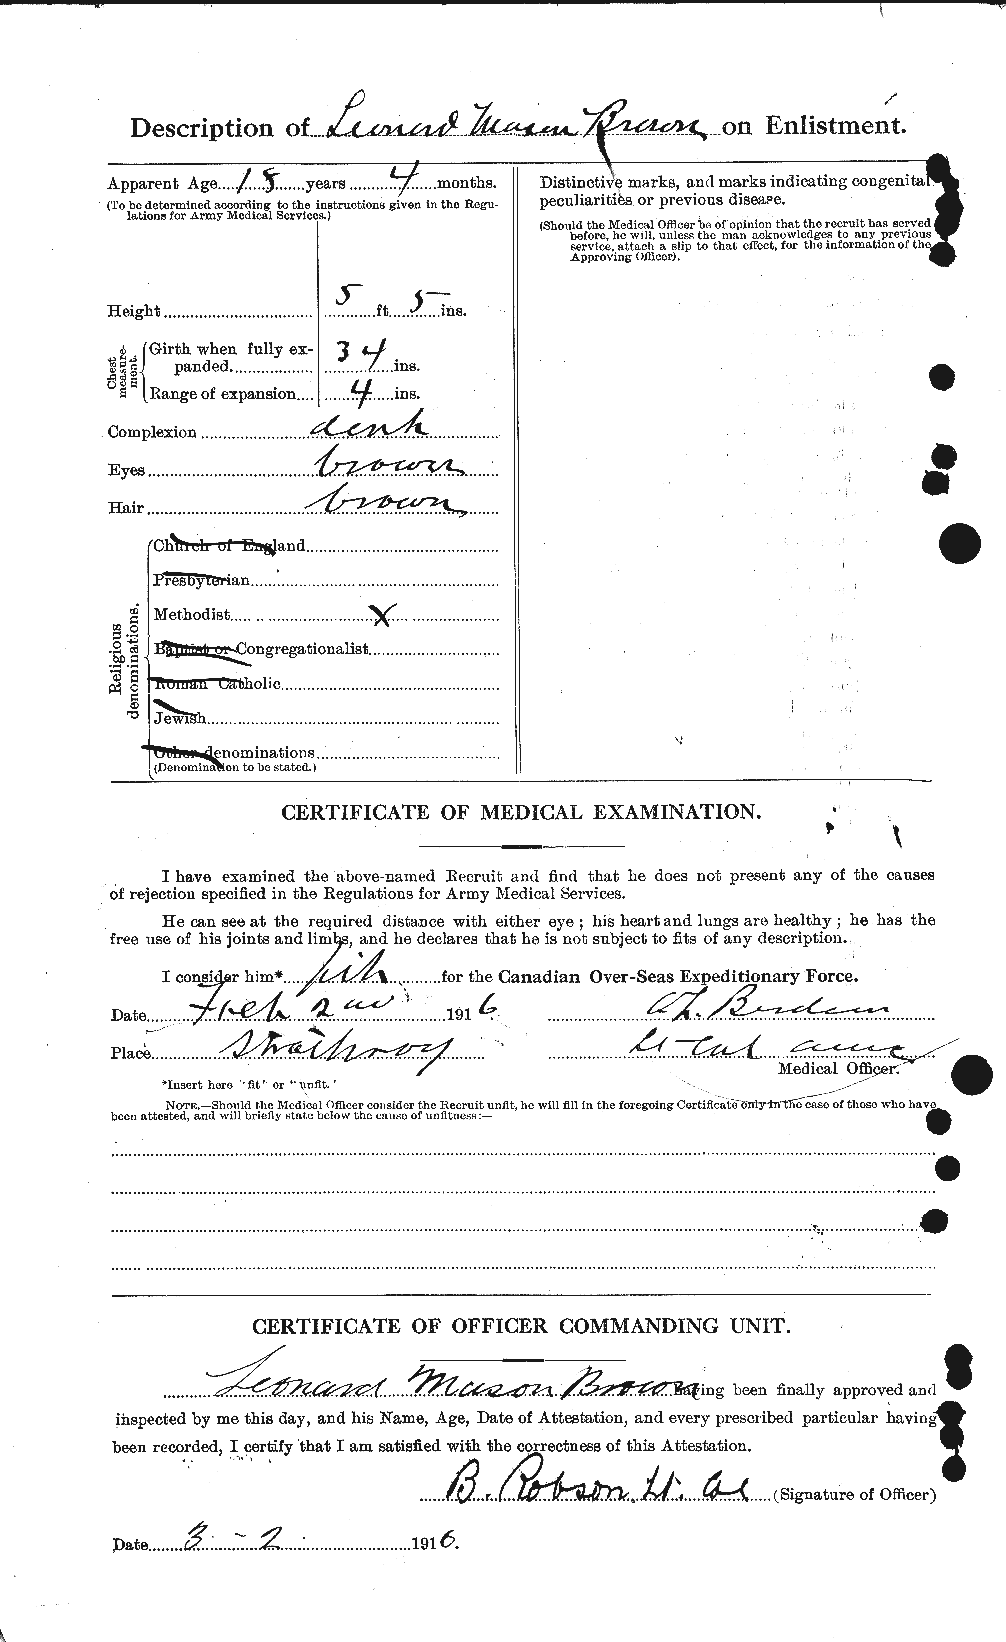 Personnel Records of the First World War - CEF 266296b